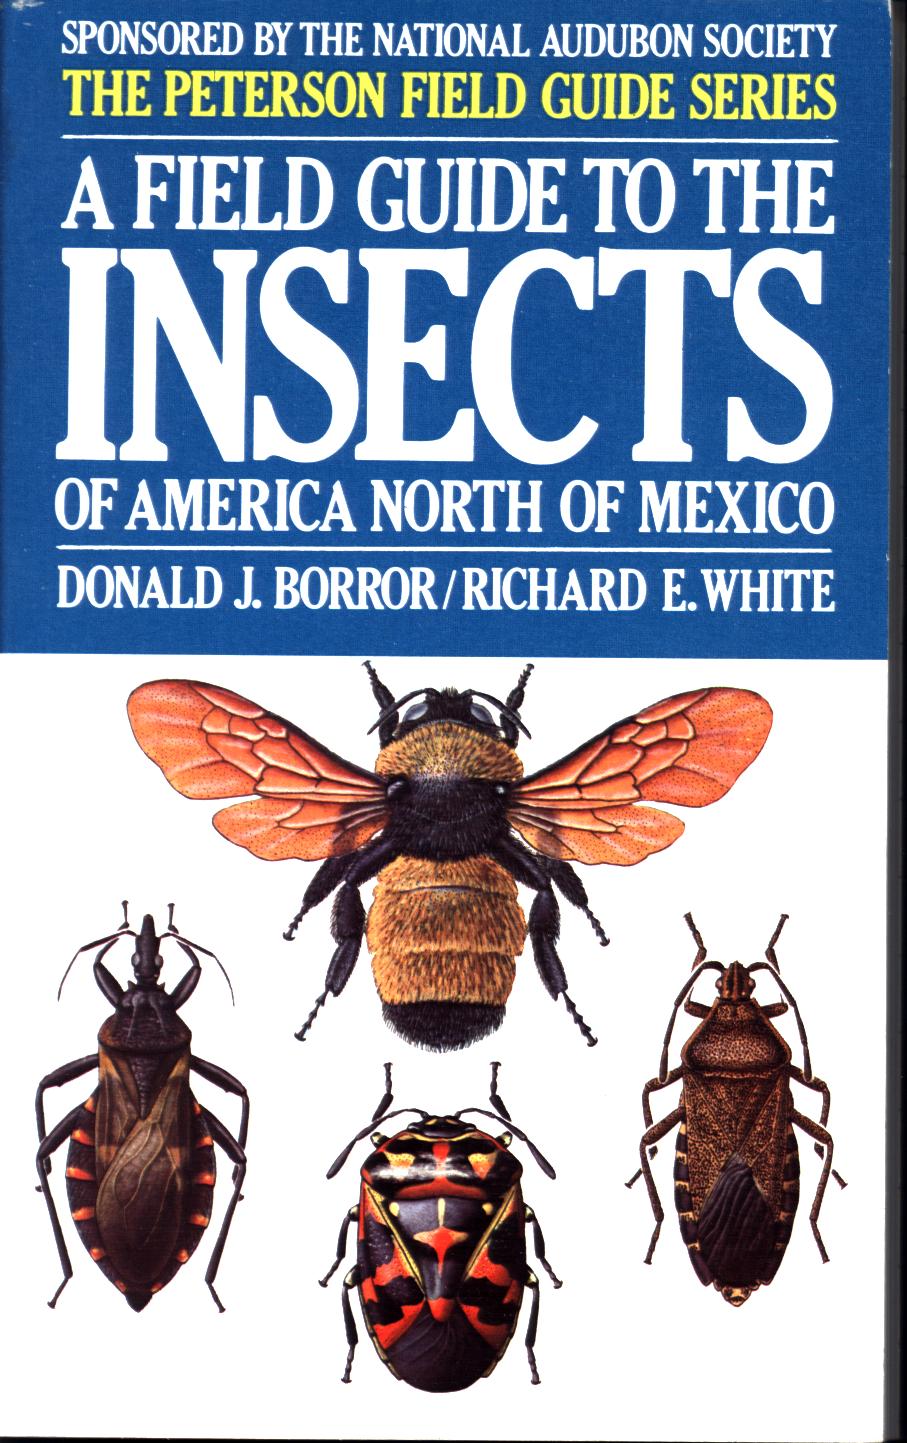 A FIELD GUIDE TO THE INSECTS OF AMERICA NORTH OF MEXICO. 